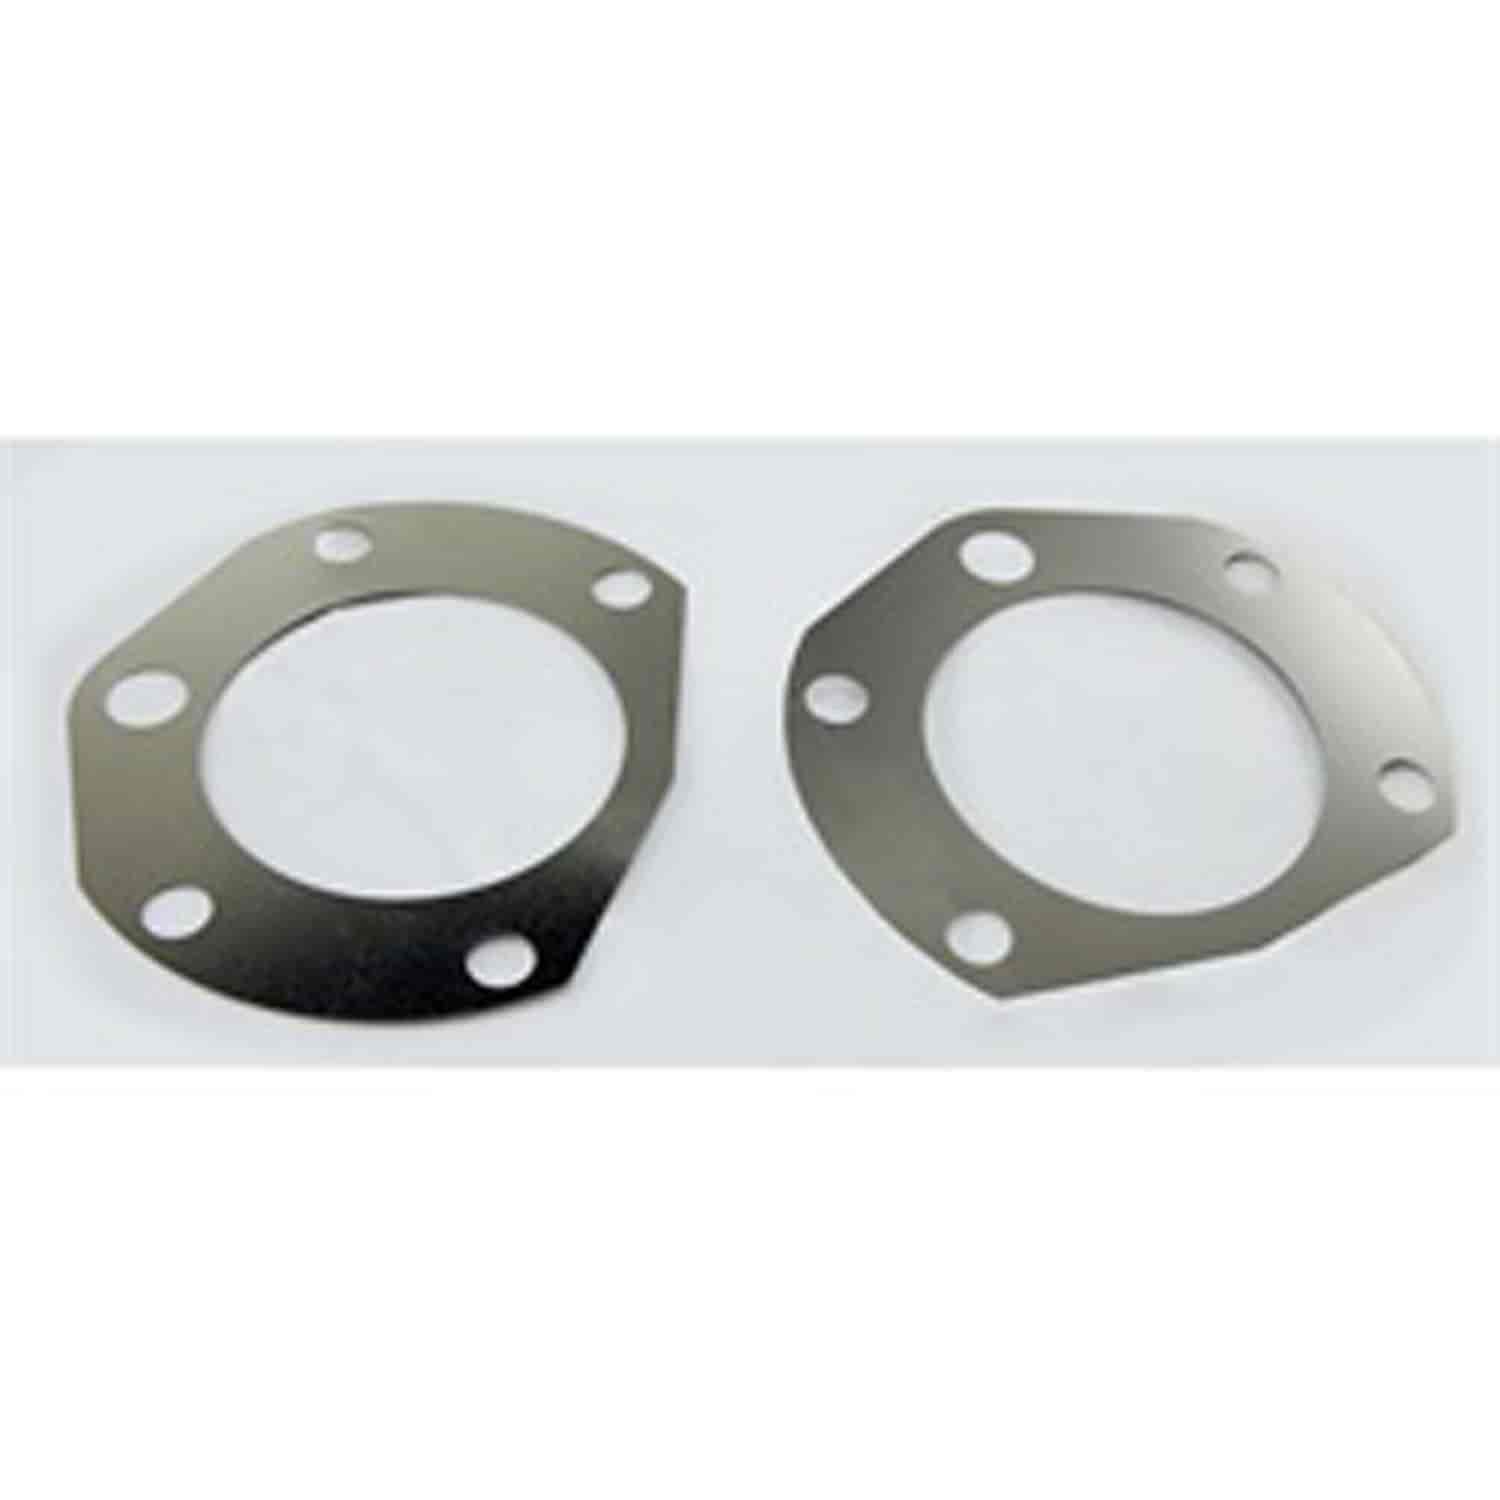 This axle shim kit from Omix-ADA fits the AMC 20 rear axle in 76-86 Jeep CJ models. The kit includes